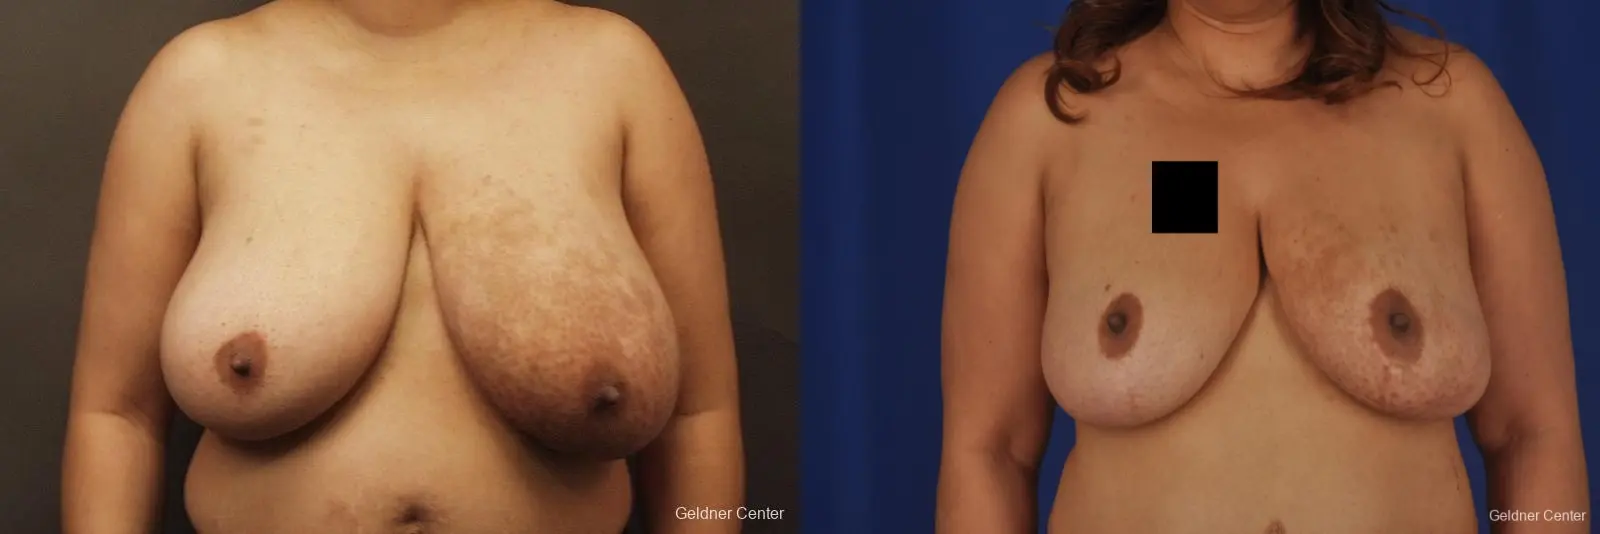 Chicago Breast Reduction 2375 - Before and After 1